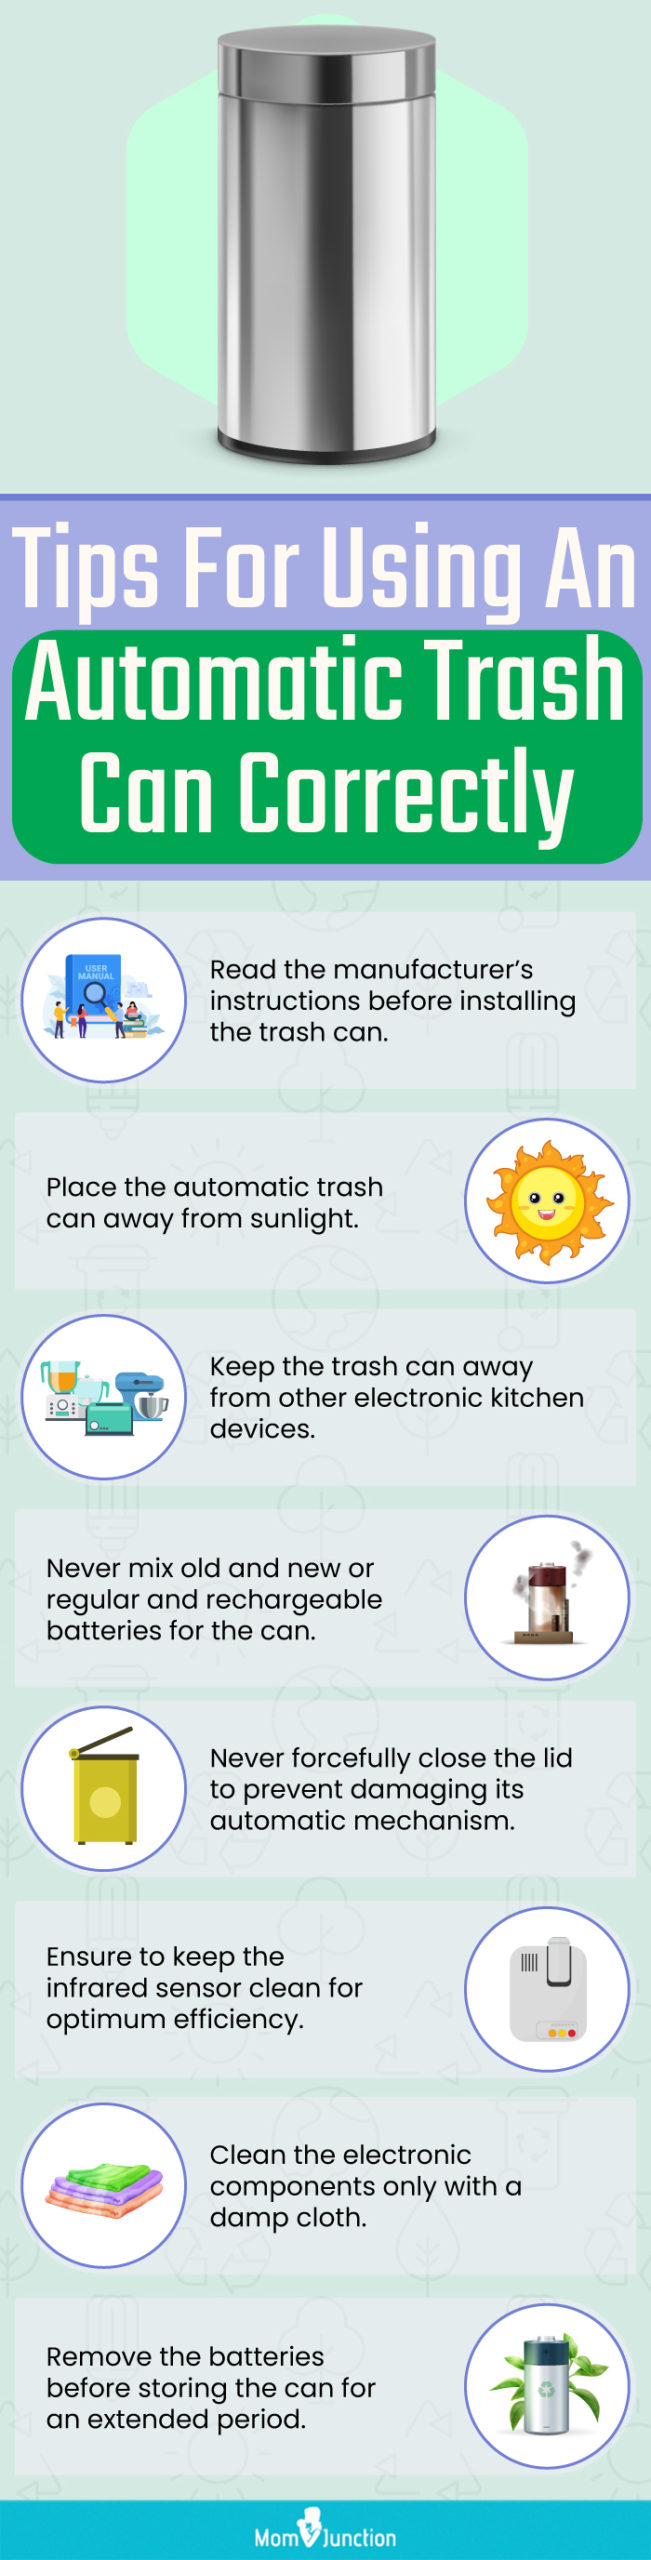 Tips For Using An Automatic Trash Can Correctly (infographic)